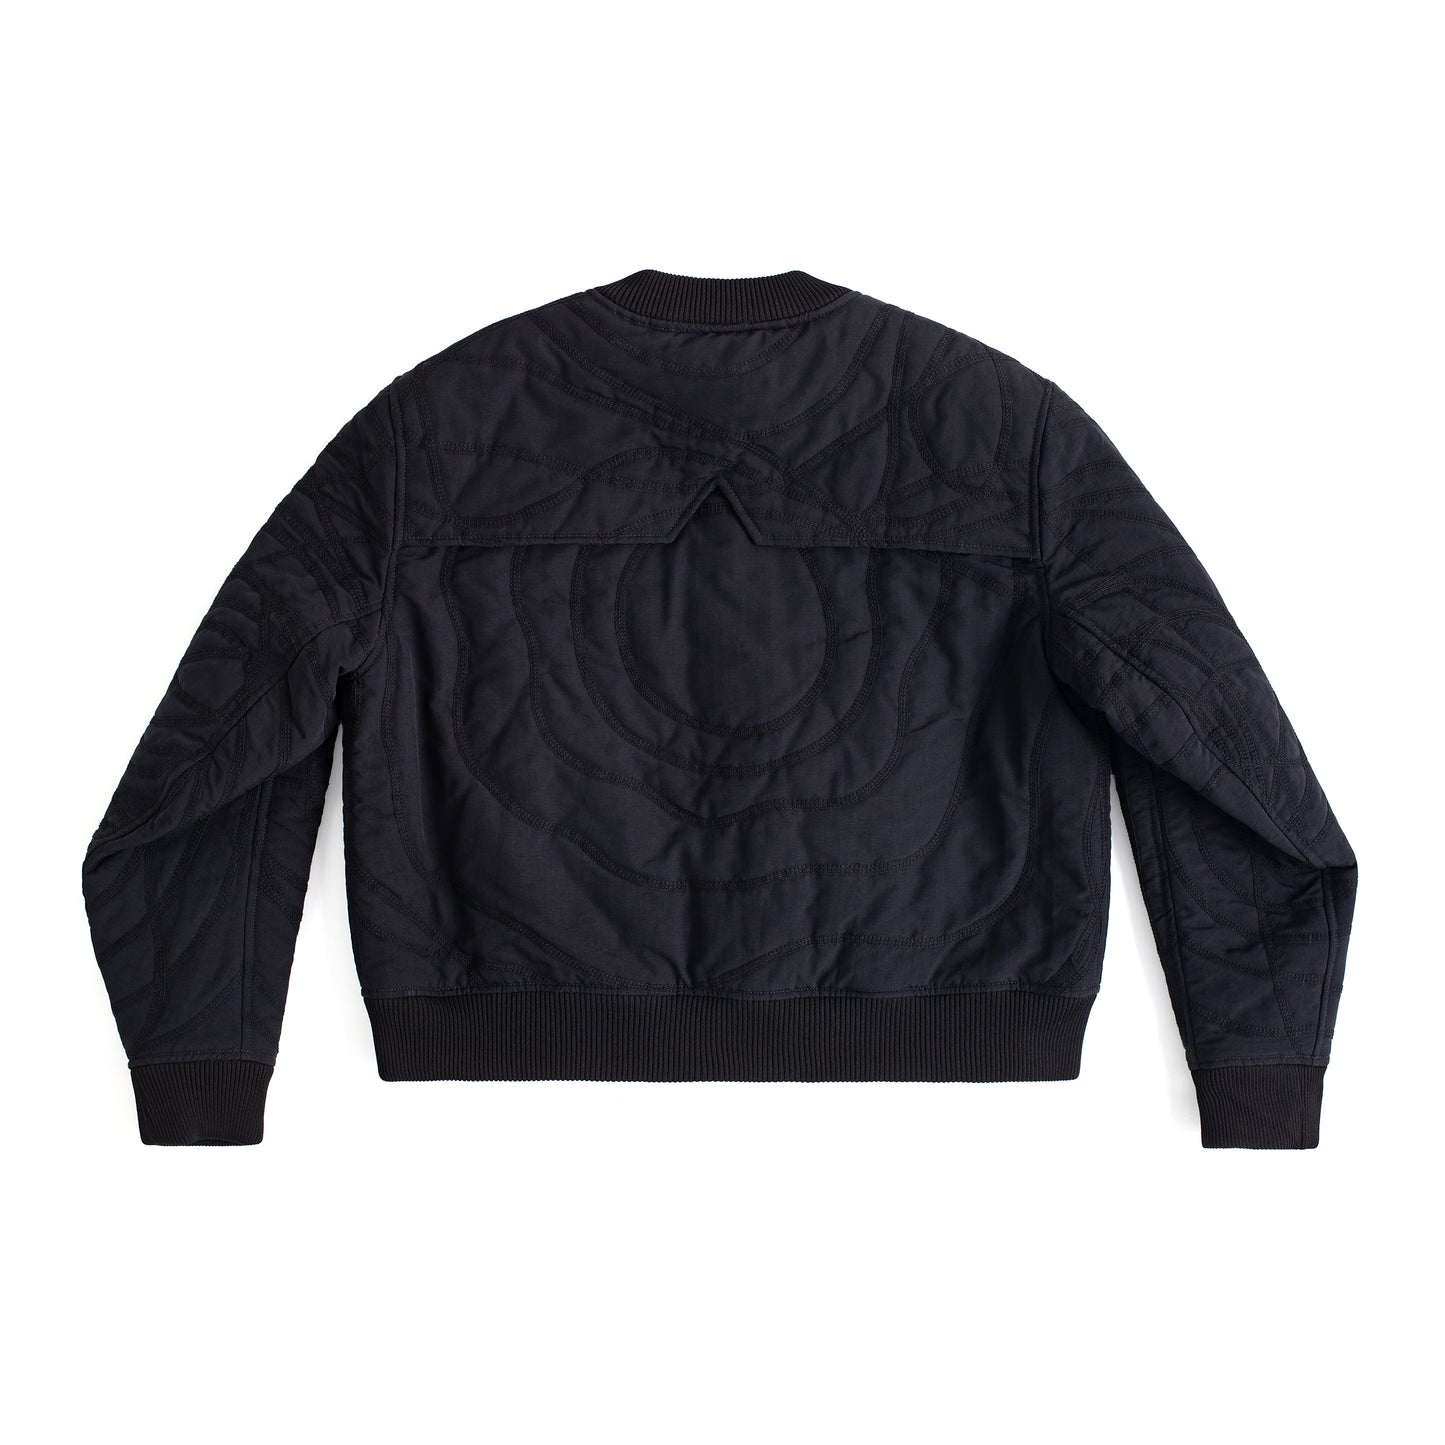 A STUDY: "LINES"" Quilted Varsity Jacket